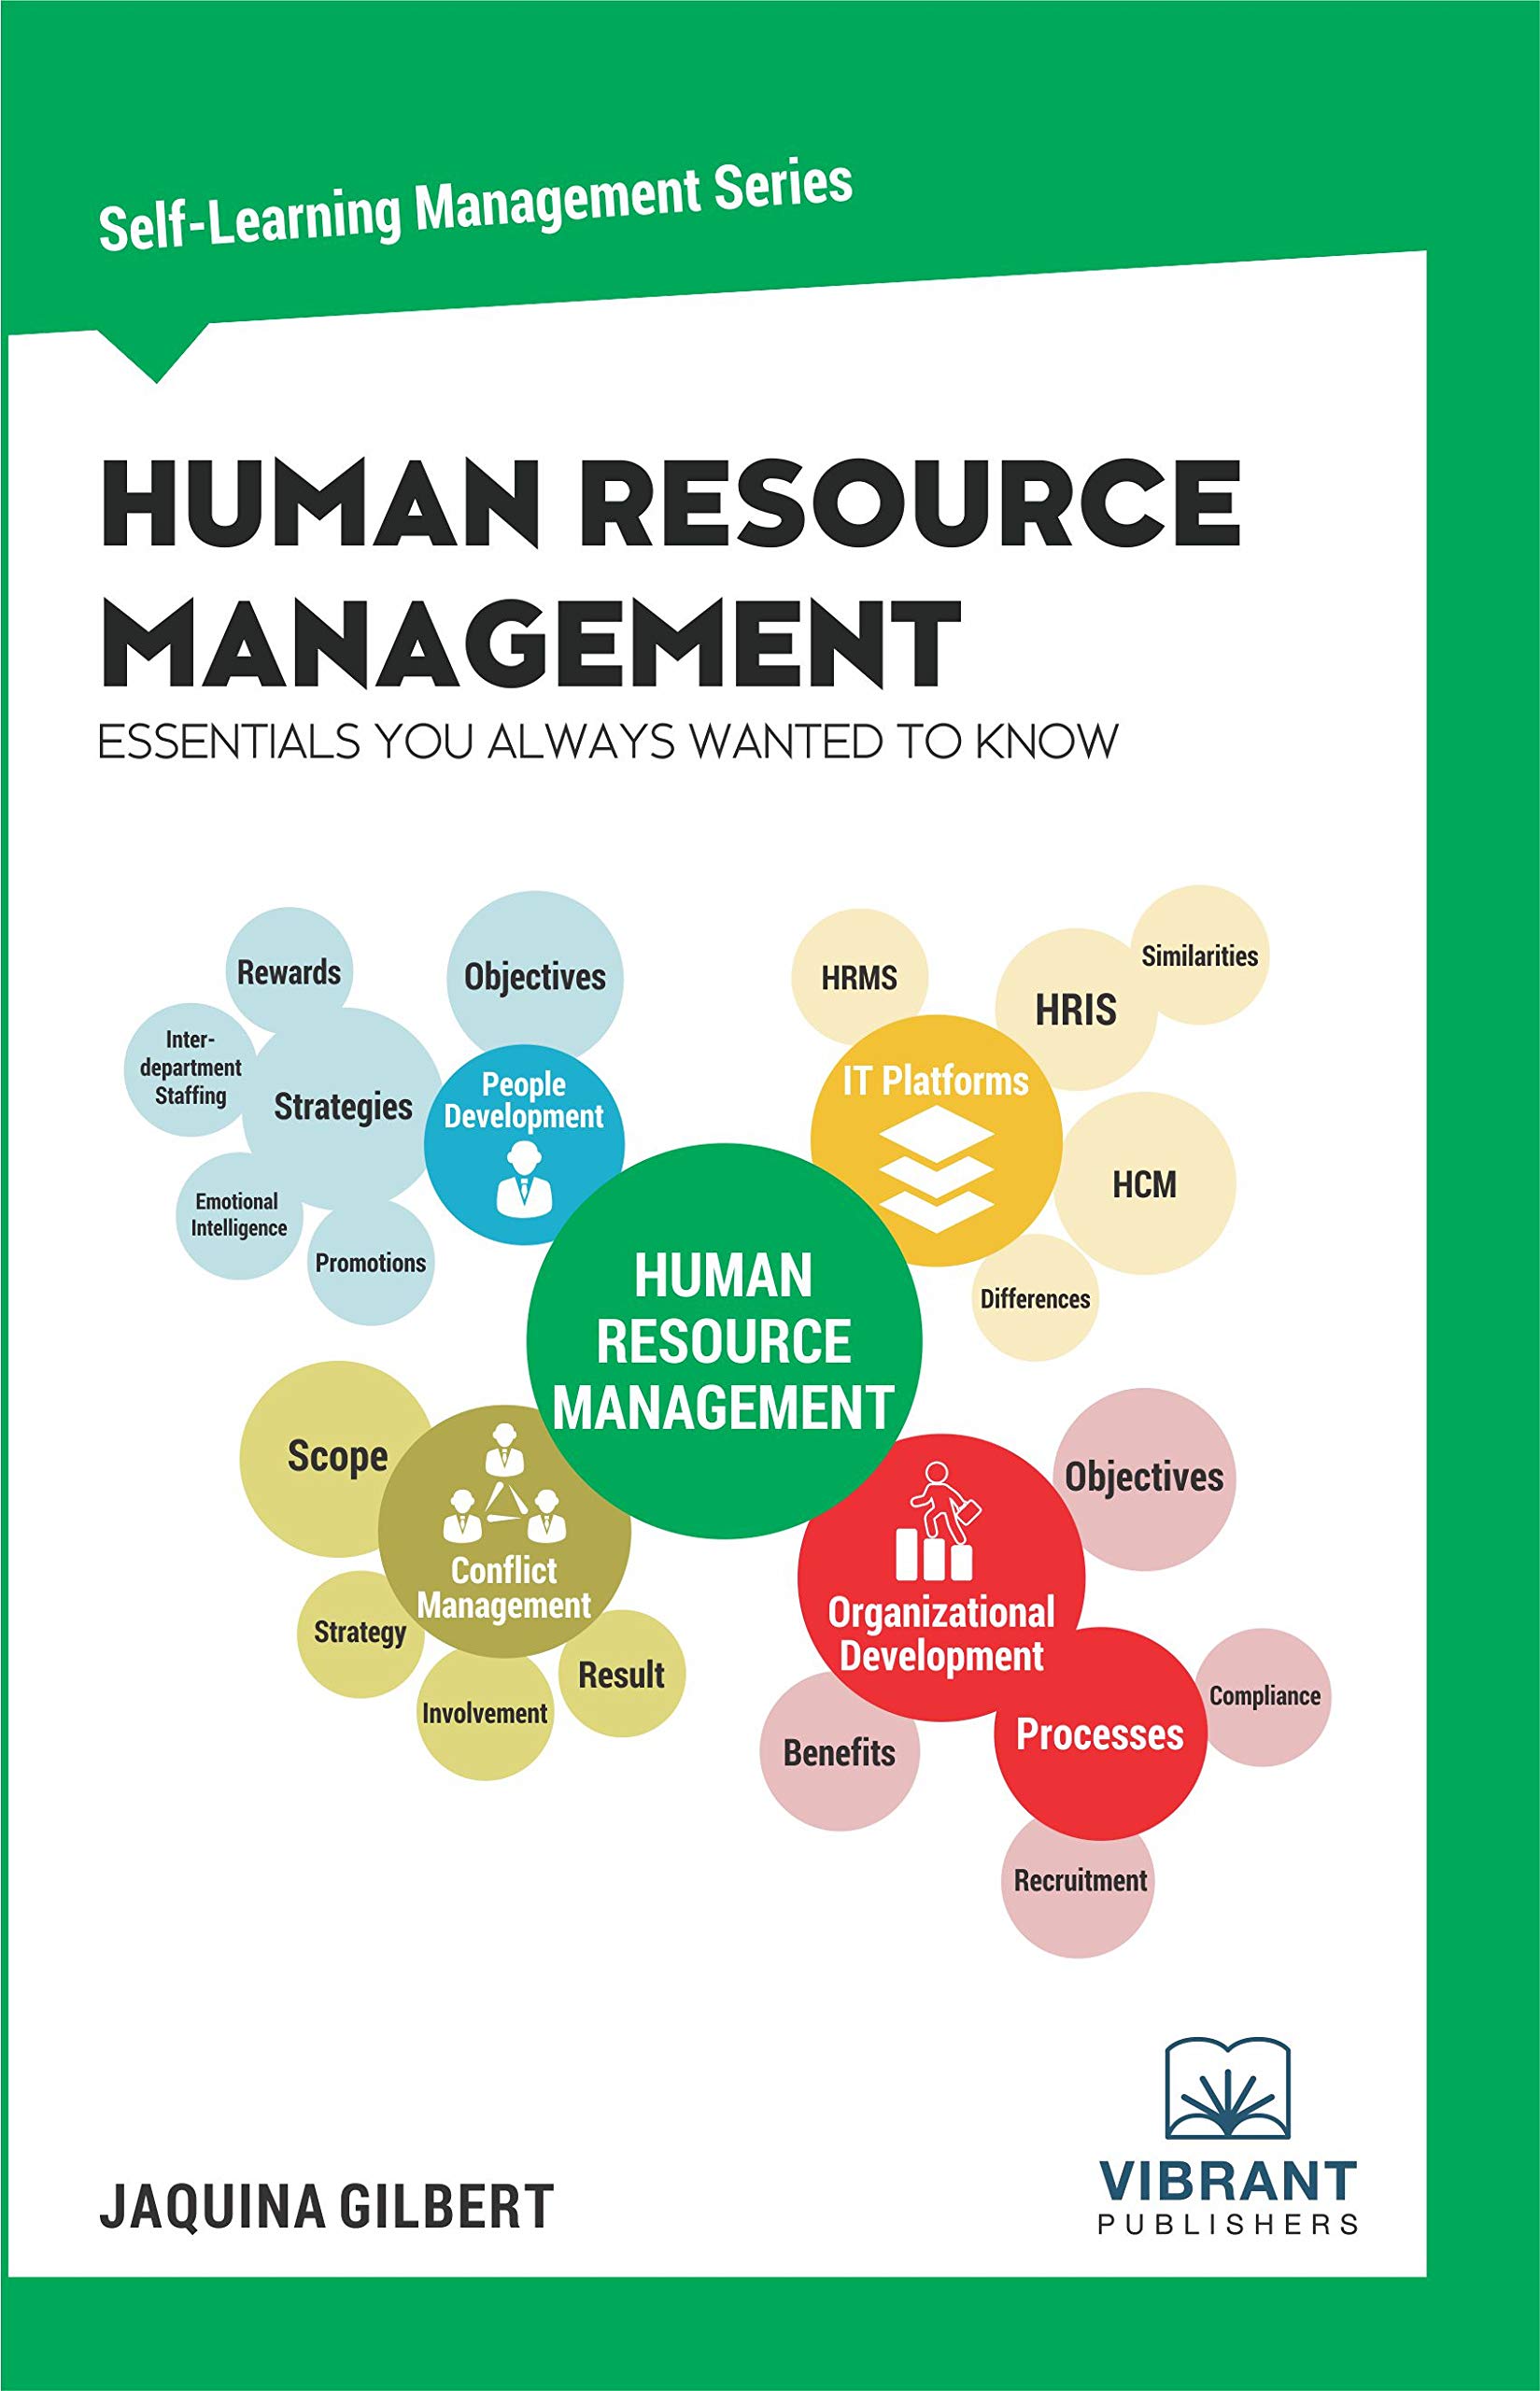 Human Resource Management Essentials You Always Wanted To Know (Self-Learning Management Series)